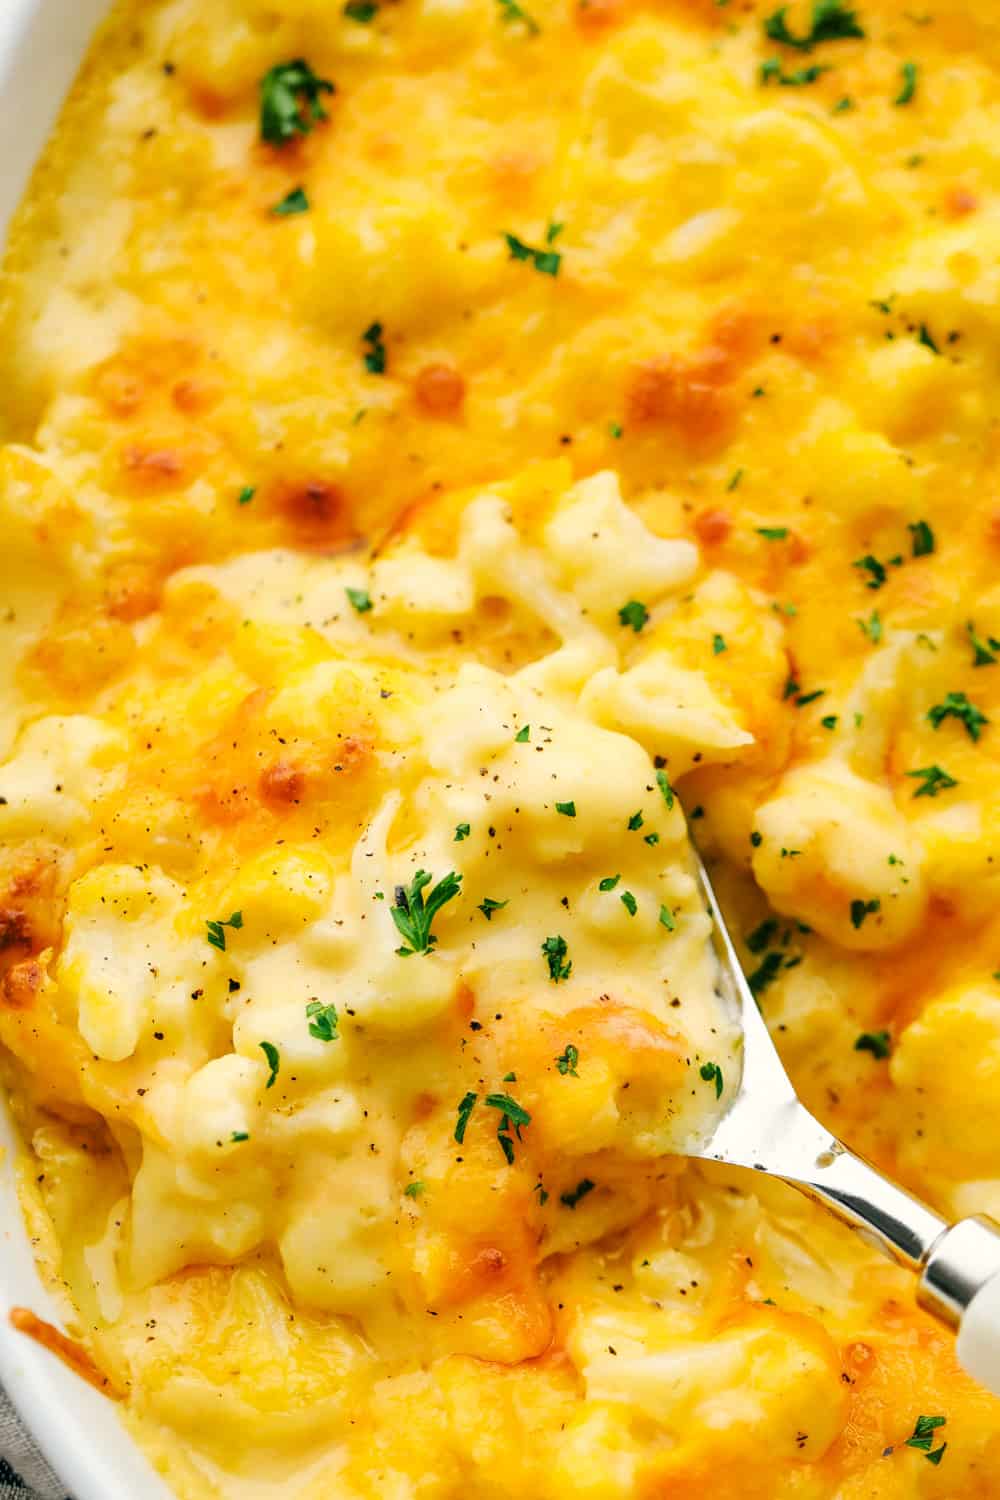 Spooning out creamy decadent cauliflower cheesy macaroni and cheese.